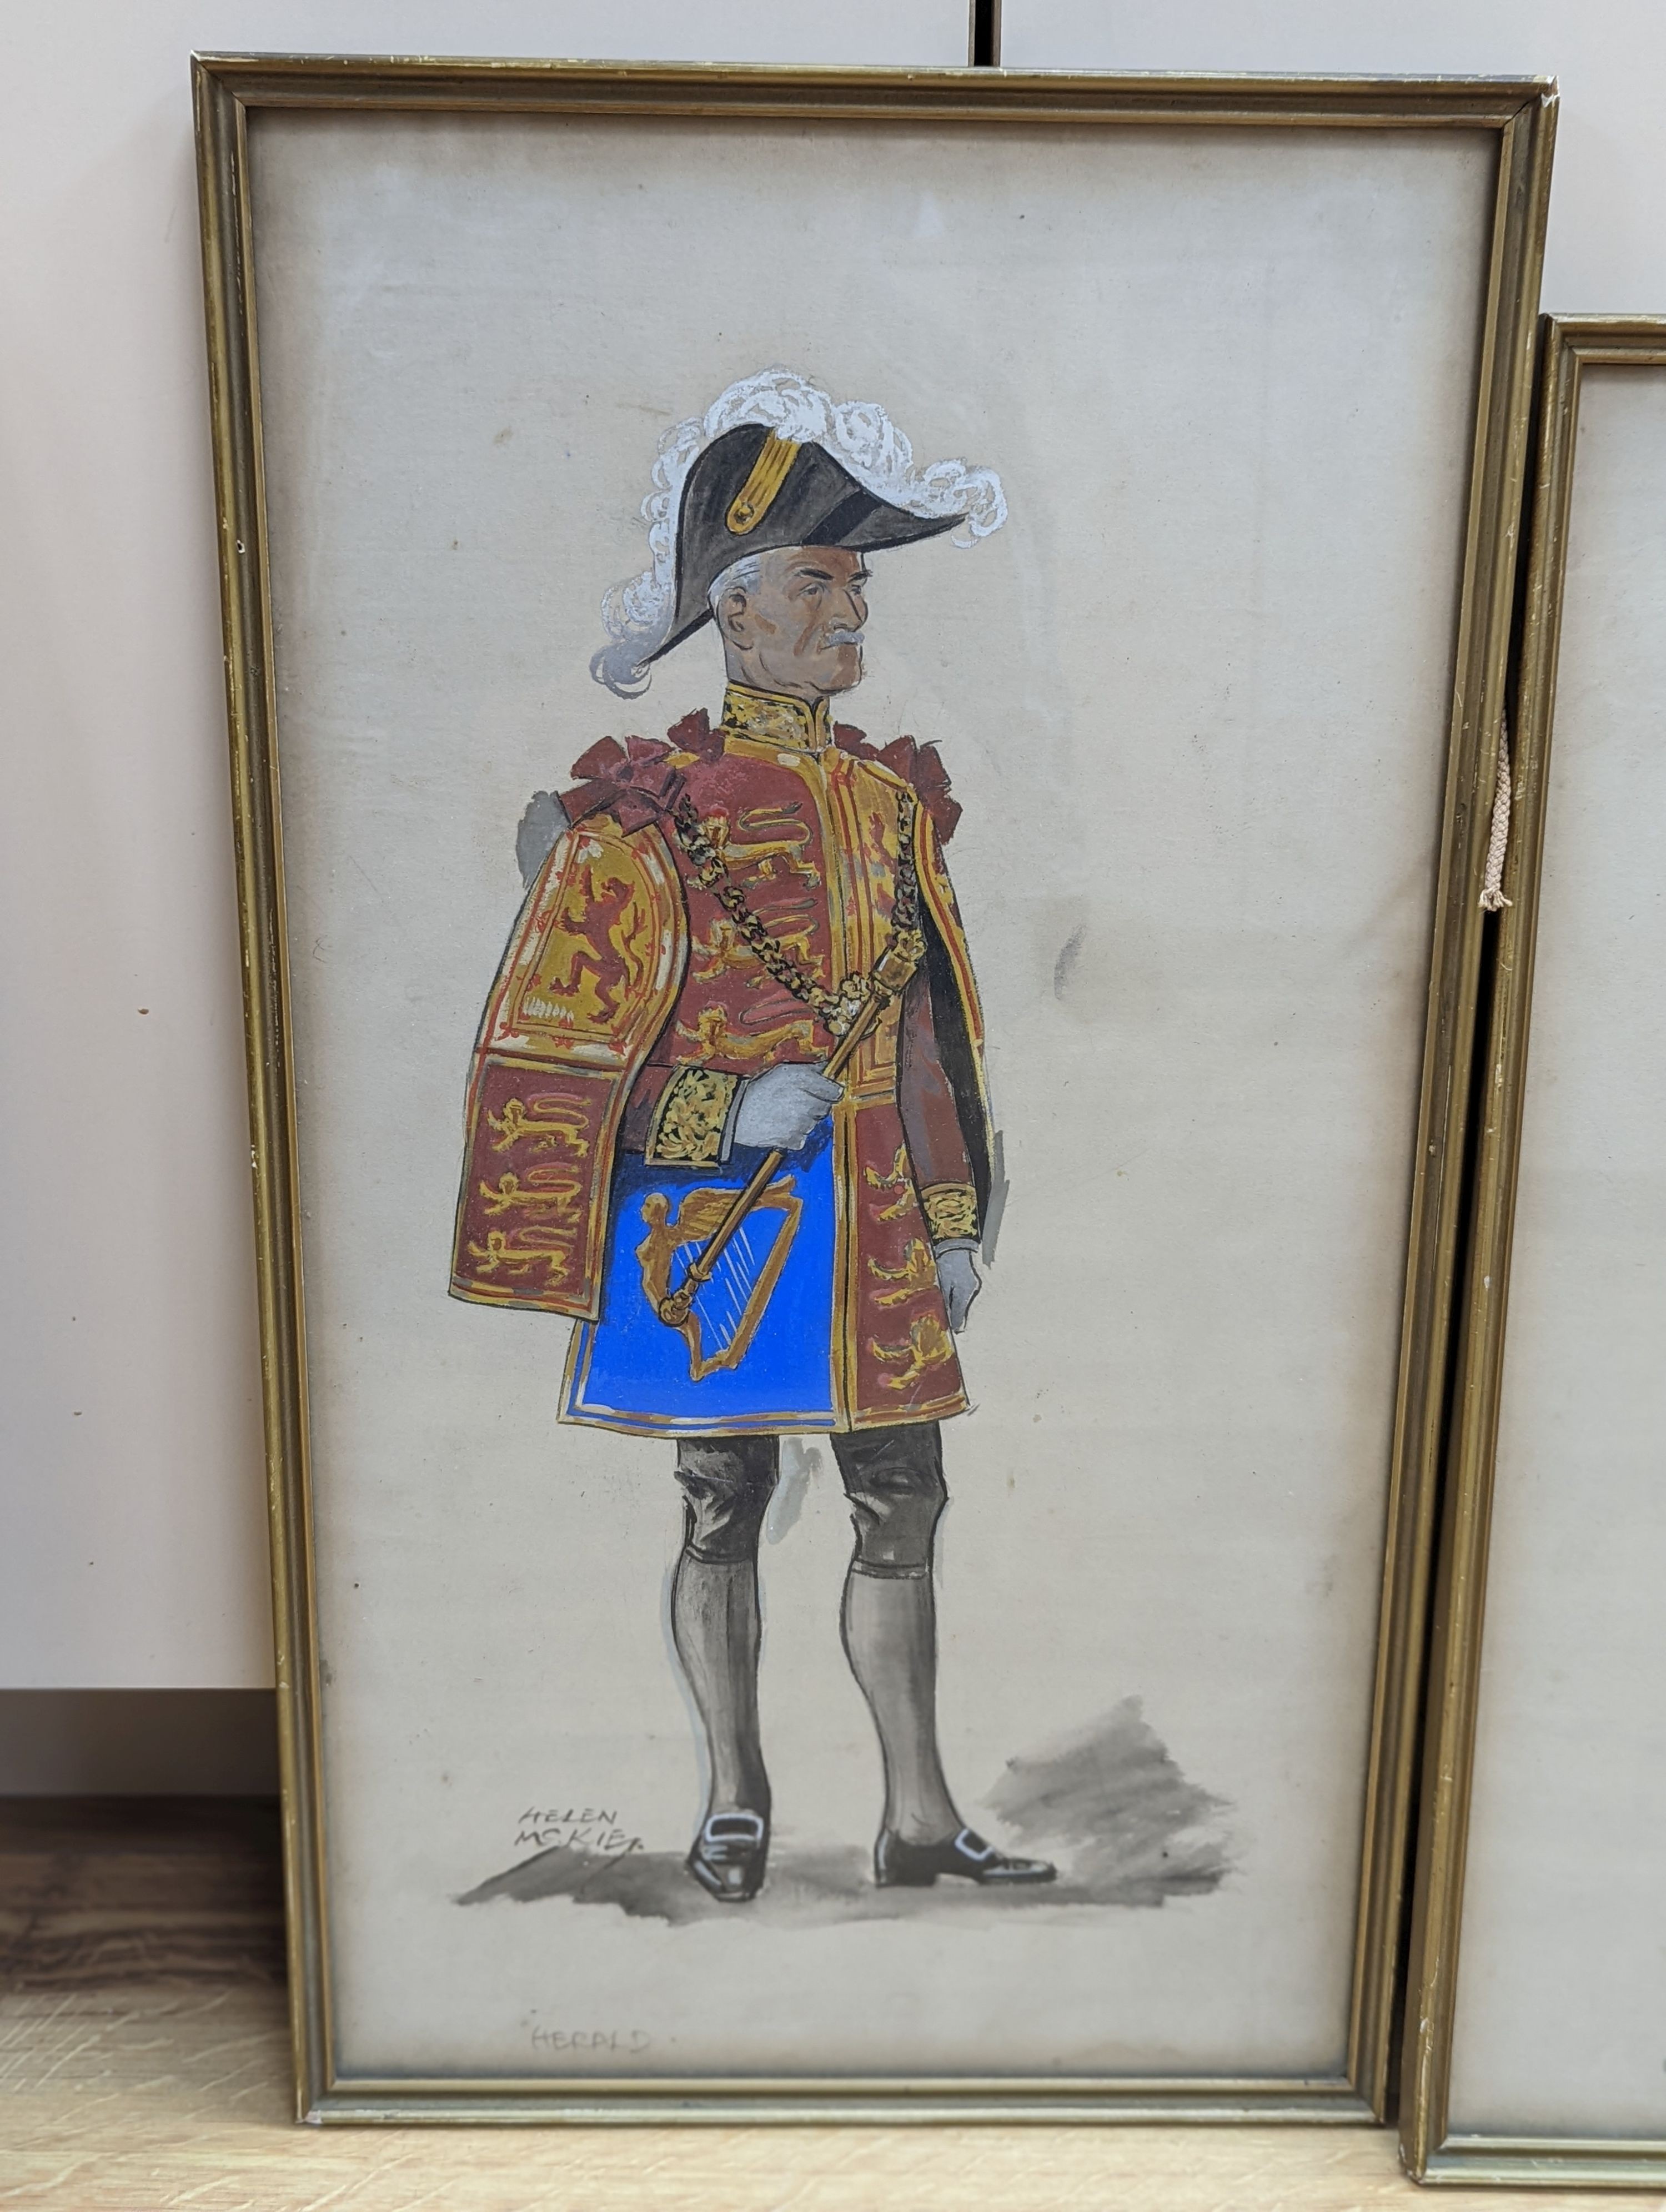 Helen McKie, three gouache and watercolour studies, Gentleman at arms, Queen's Page of Honour and Herald, signed, largest 47 x 26cm